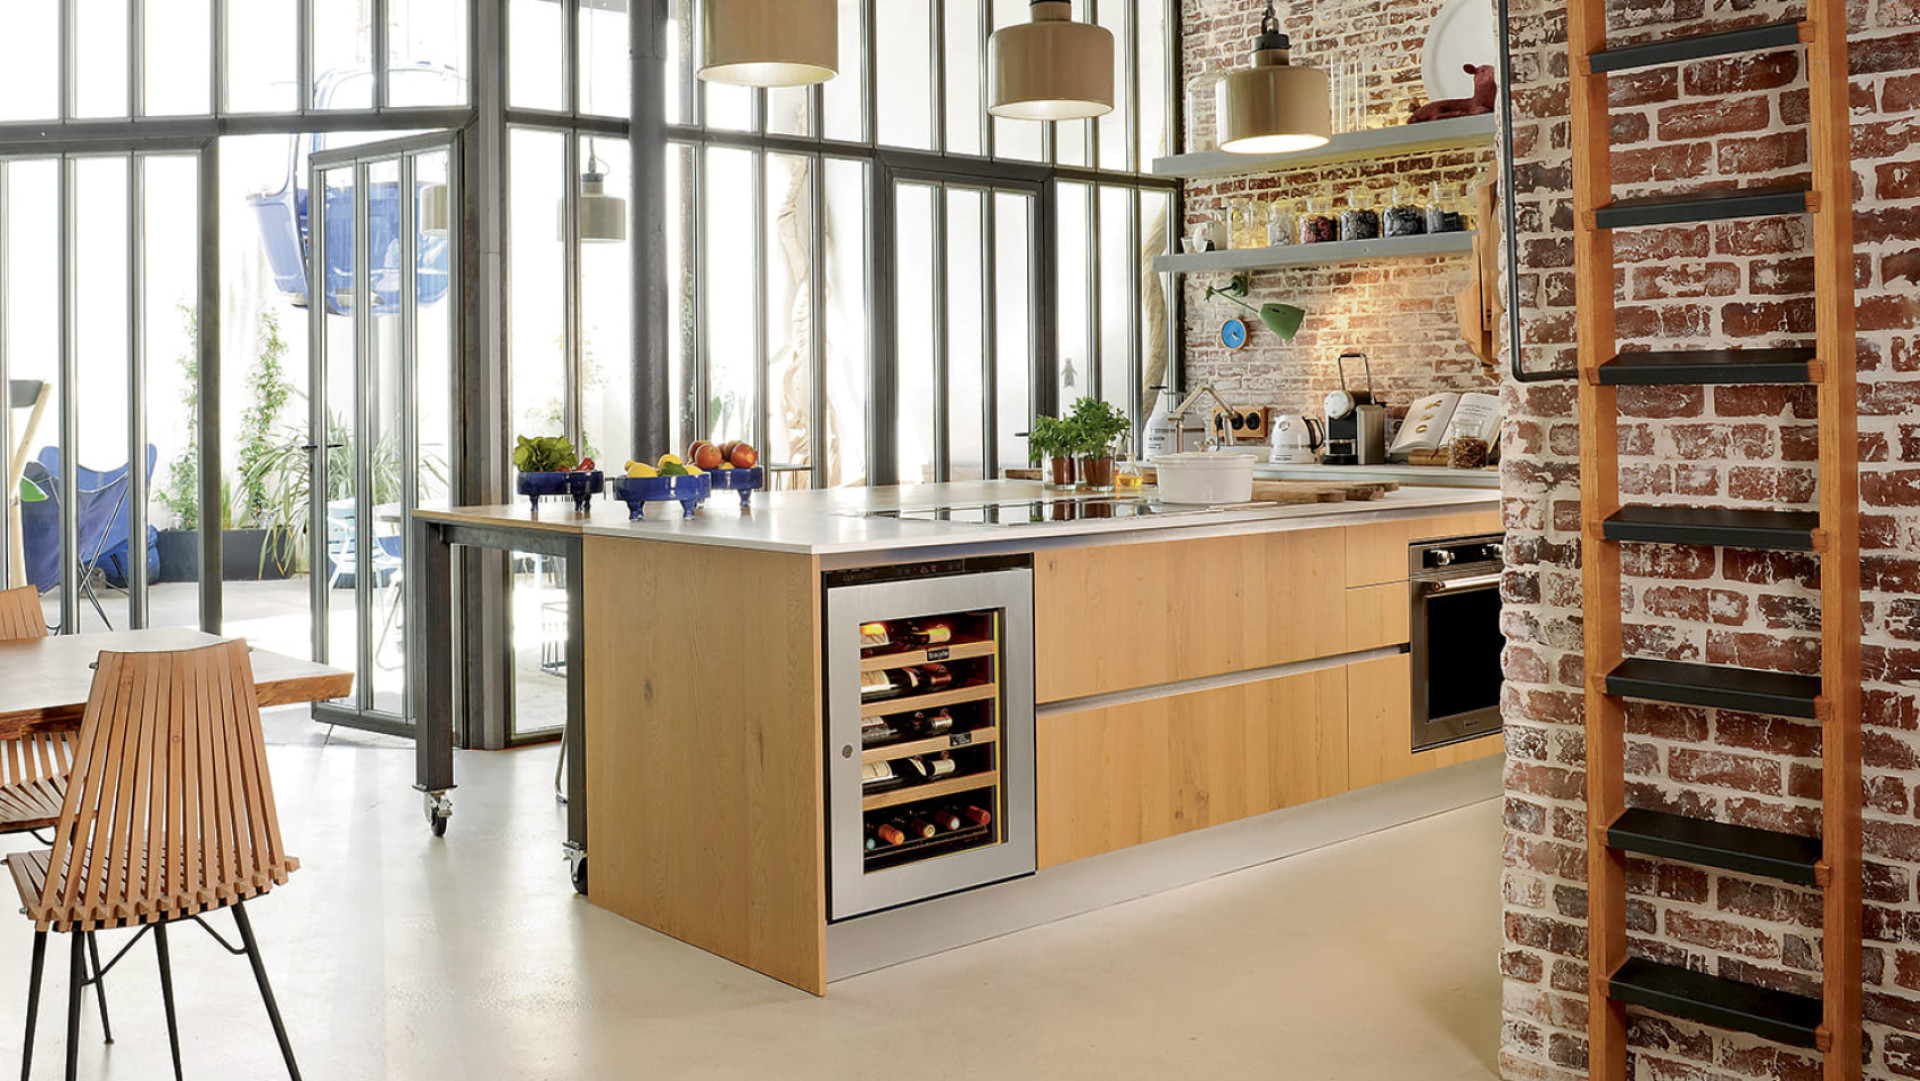 Small size glass door wine cooler with stainless steel frame in an open plan kitchen with industrial design bay window, brick wall and light wood furniture.